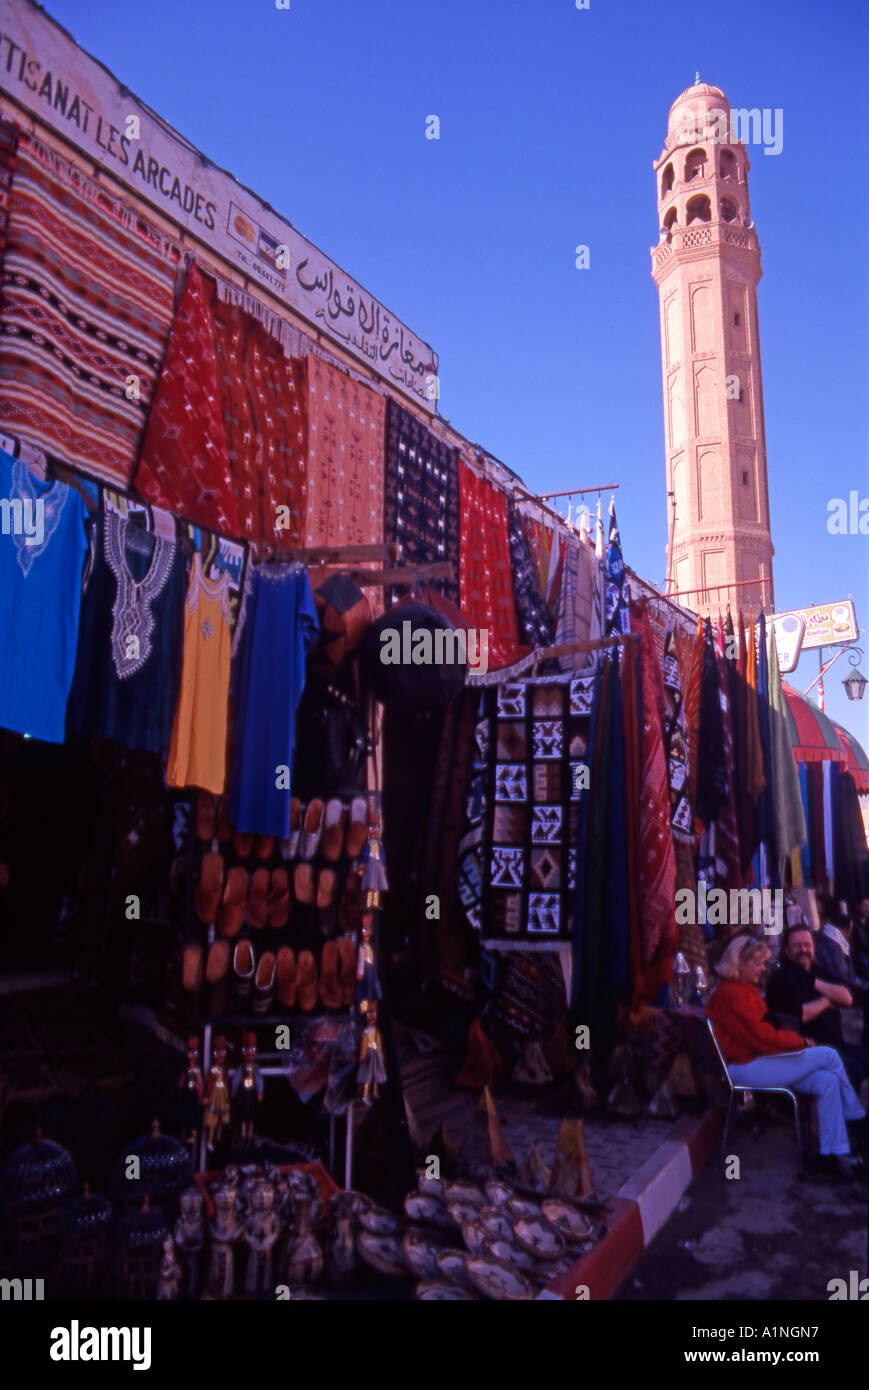 Tunisia North Africa Tozeur Town Mosque and a shop selling touristic items Stock Photo